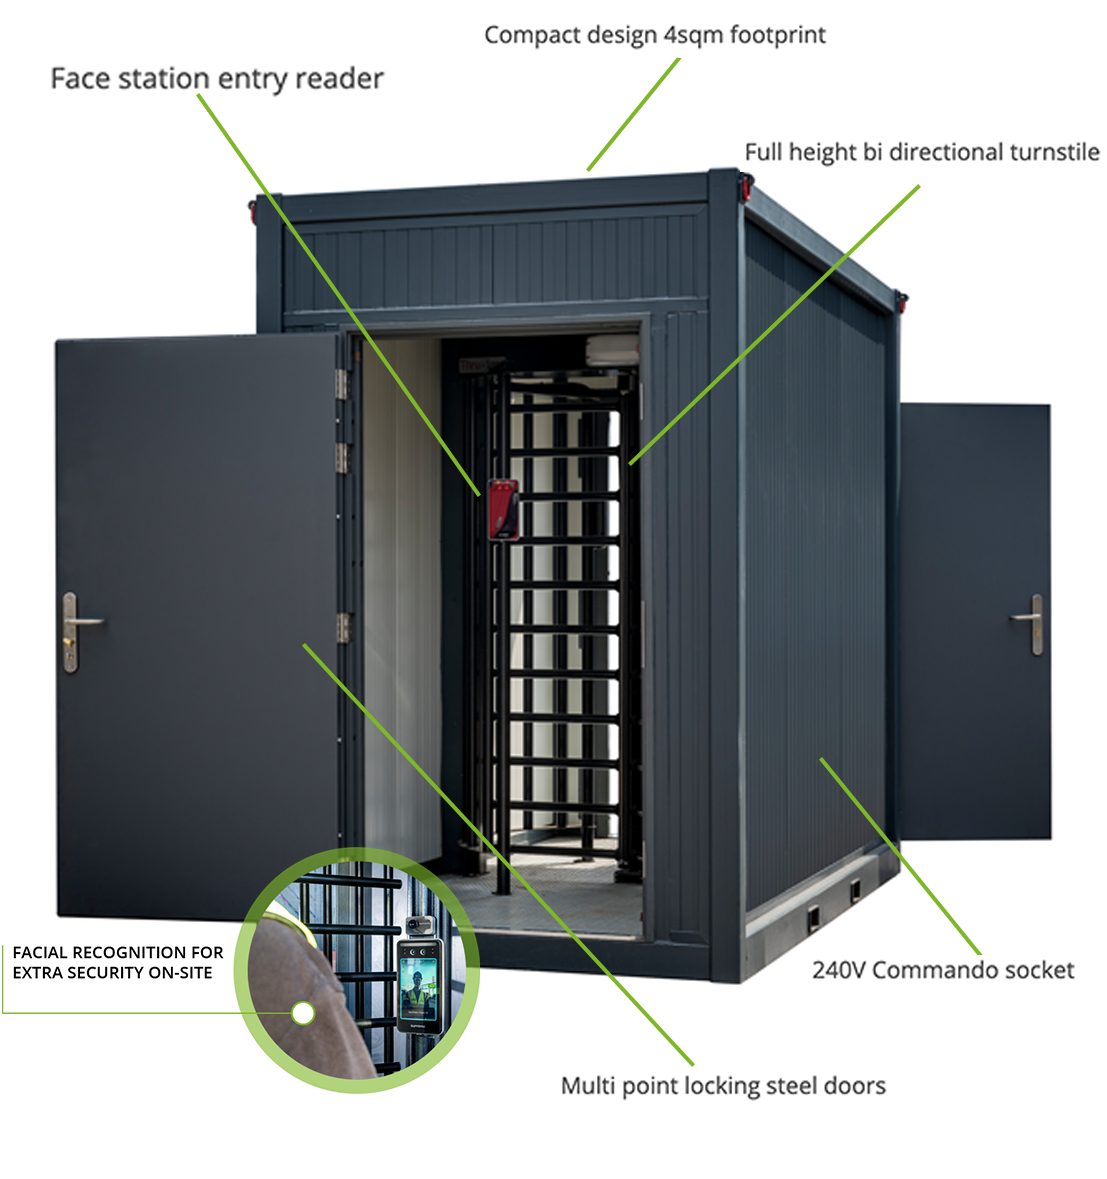 fully enclosed facial recognition turnstile pod with a close up of the facial scanning system